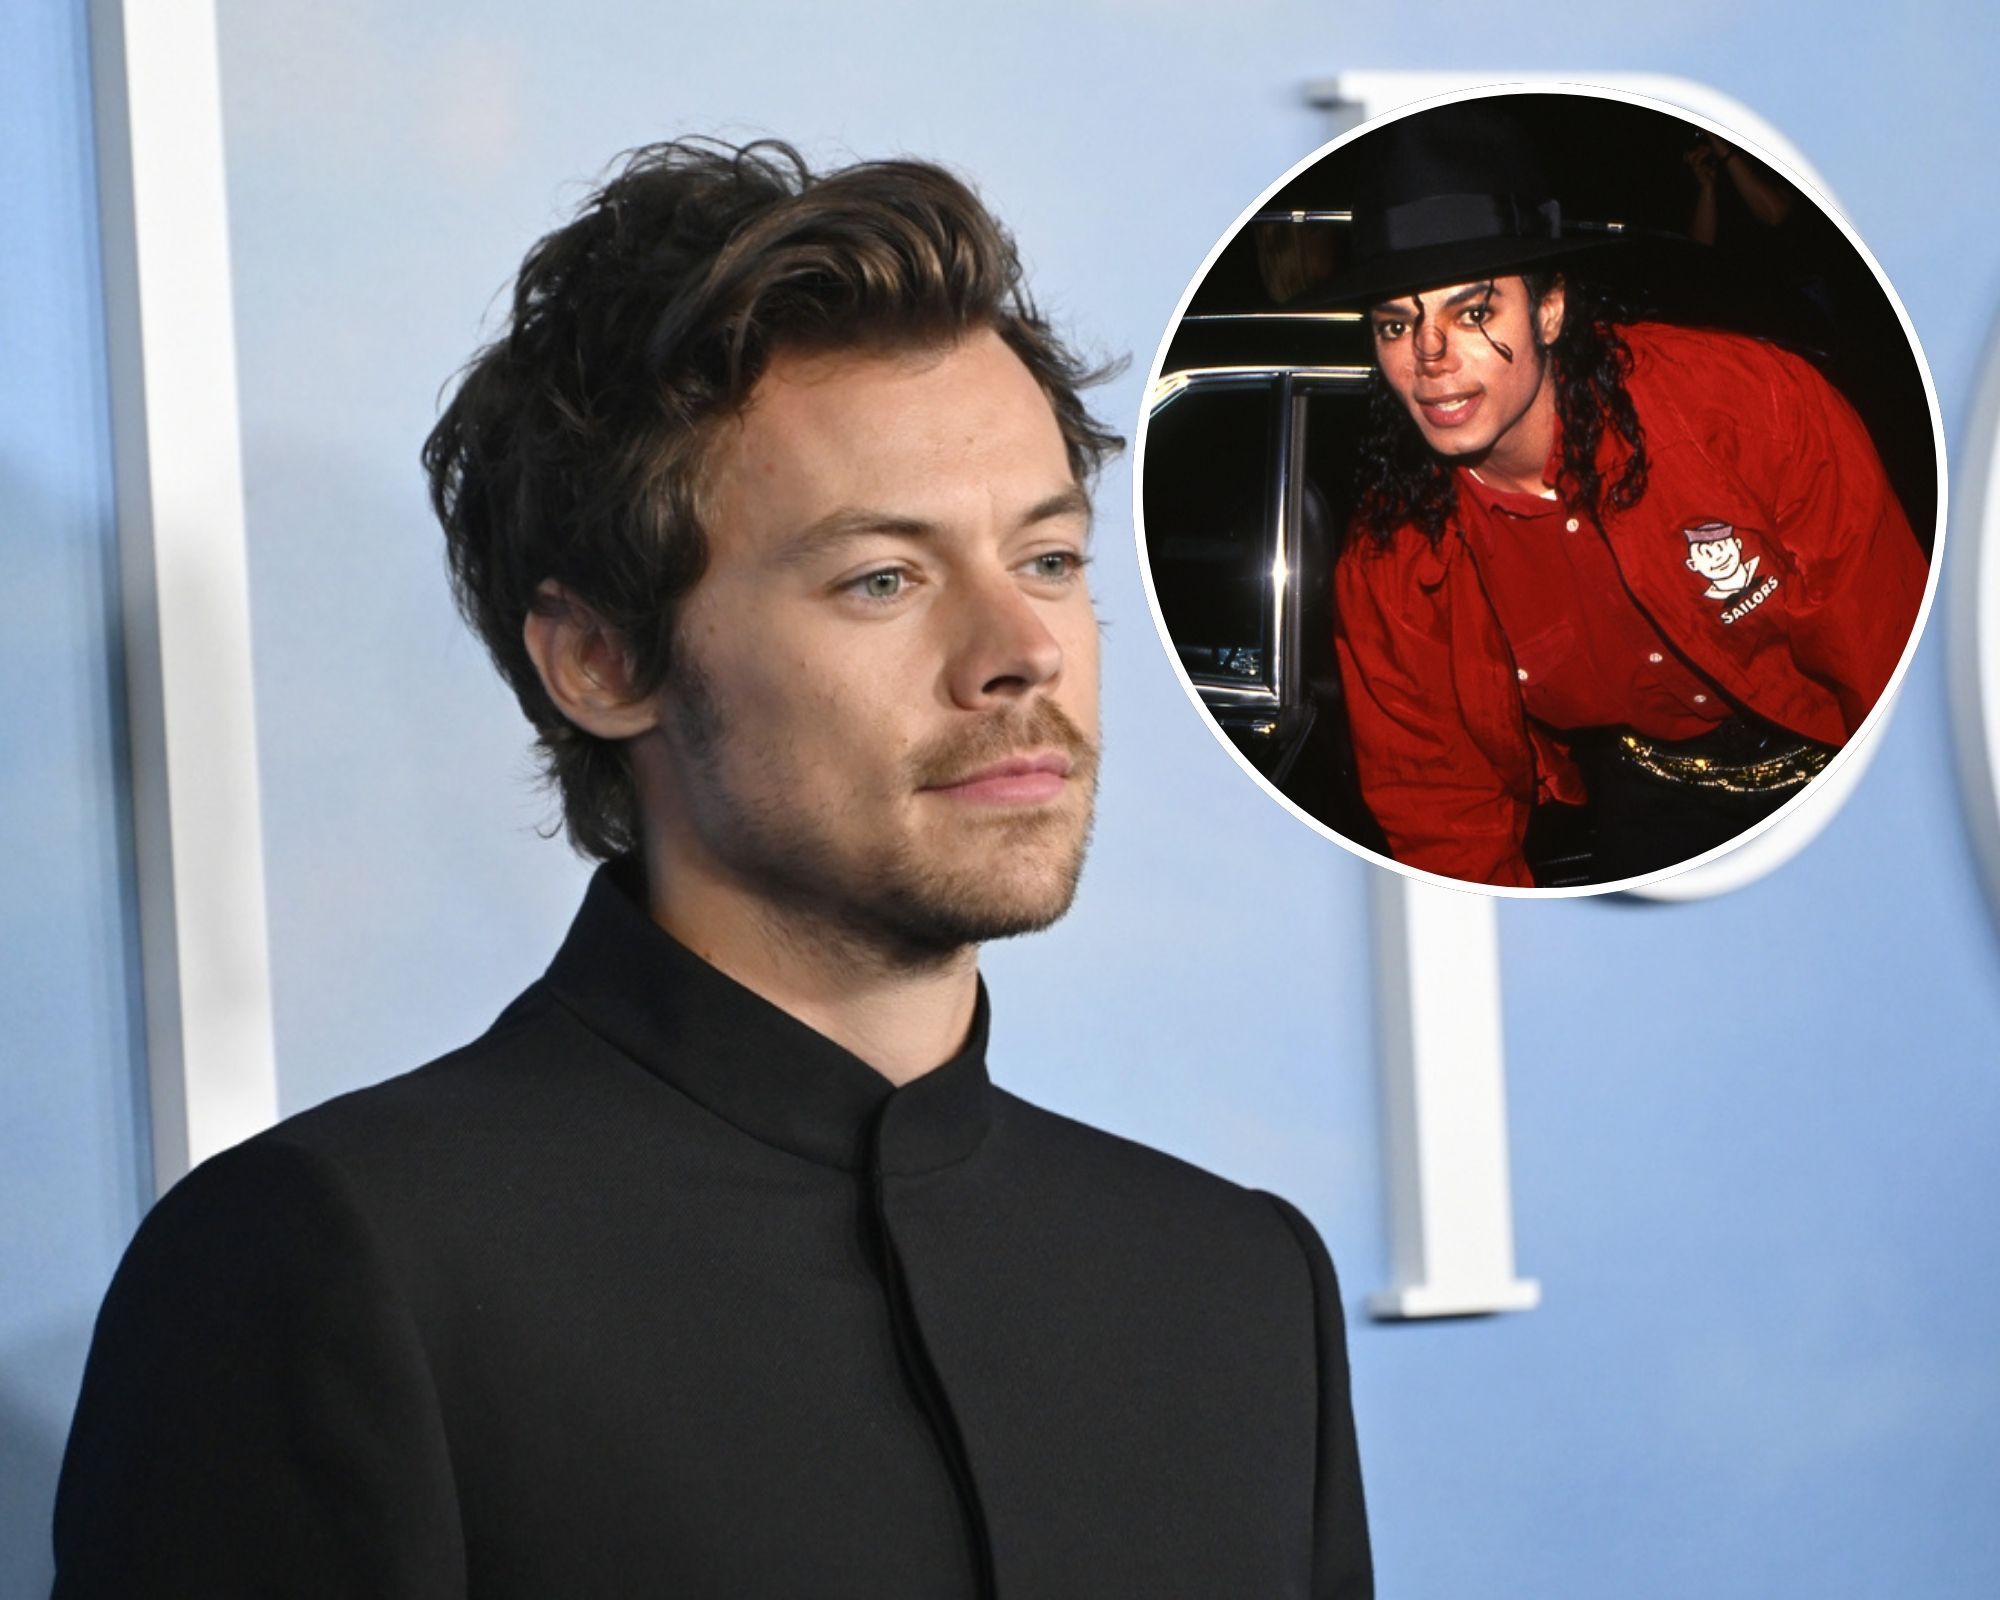 Harry Styles Replaces Michael Jackson as ‘The King of Pop’